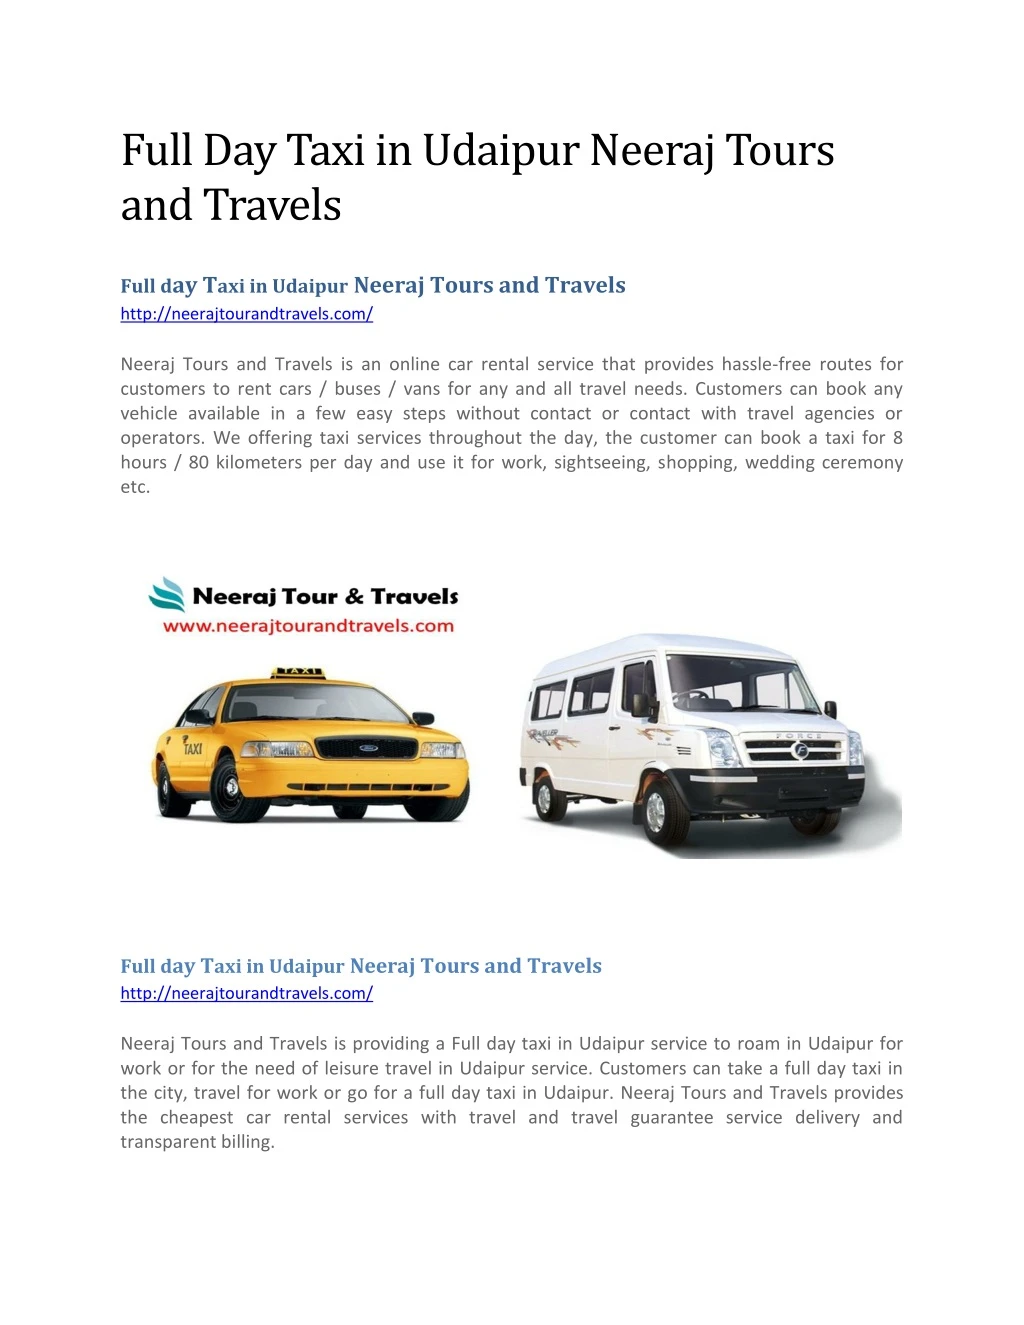 full day taxi in udaipur neeraj tours and travels